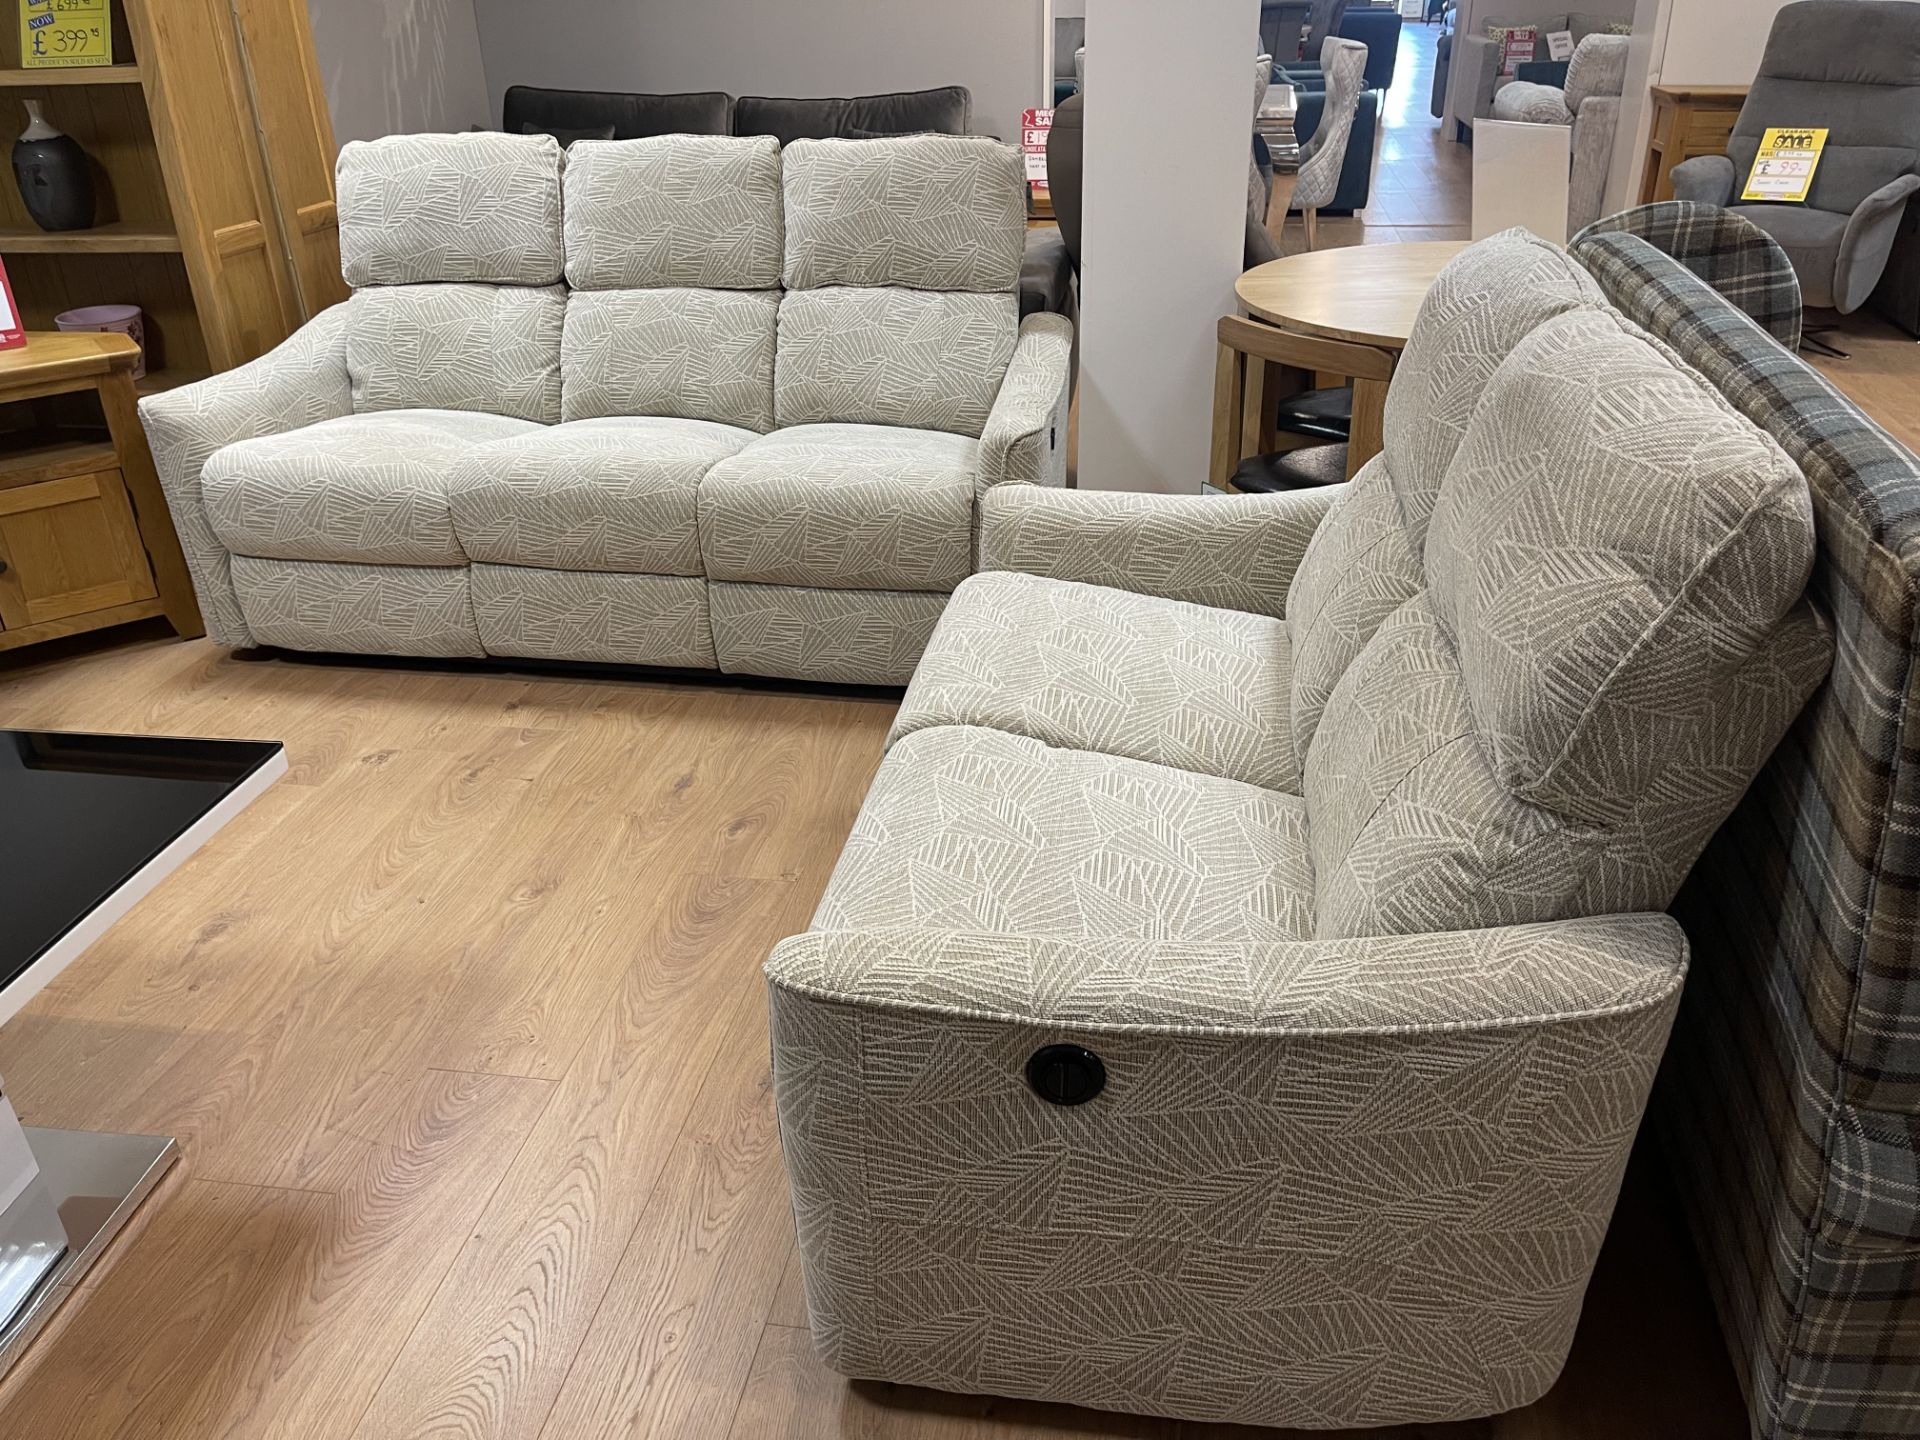 Brand New Boxed 3 Seater Seattle Electric Reclining Sofa In Brushstroke Cream Fabric - Image 3 of 3